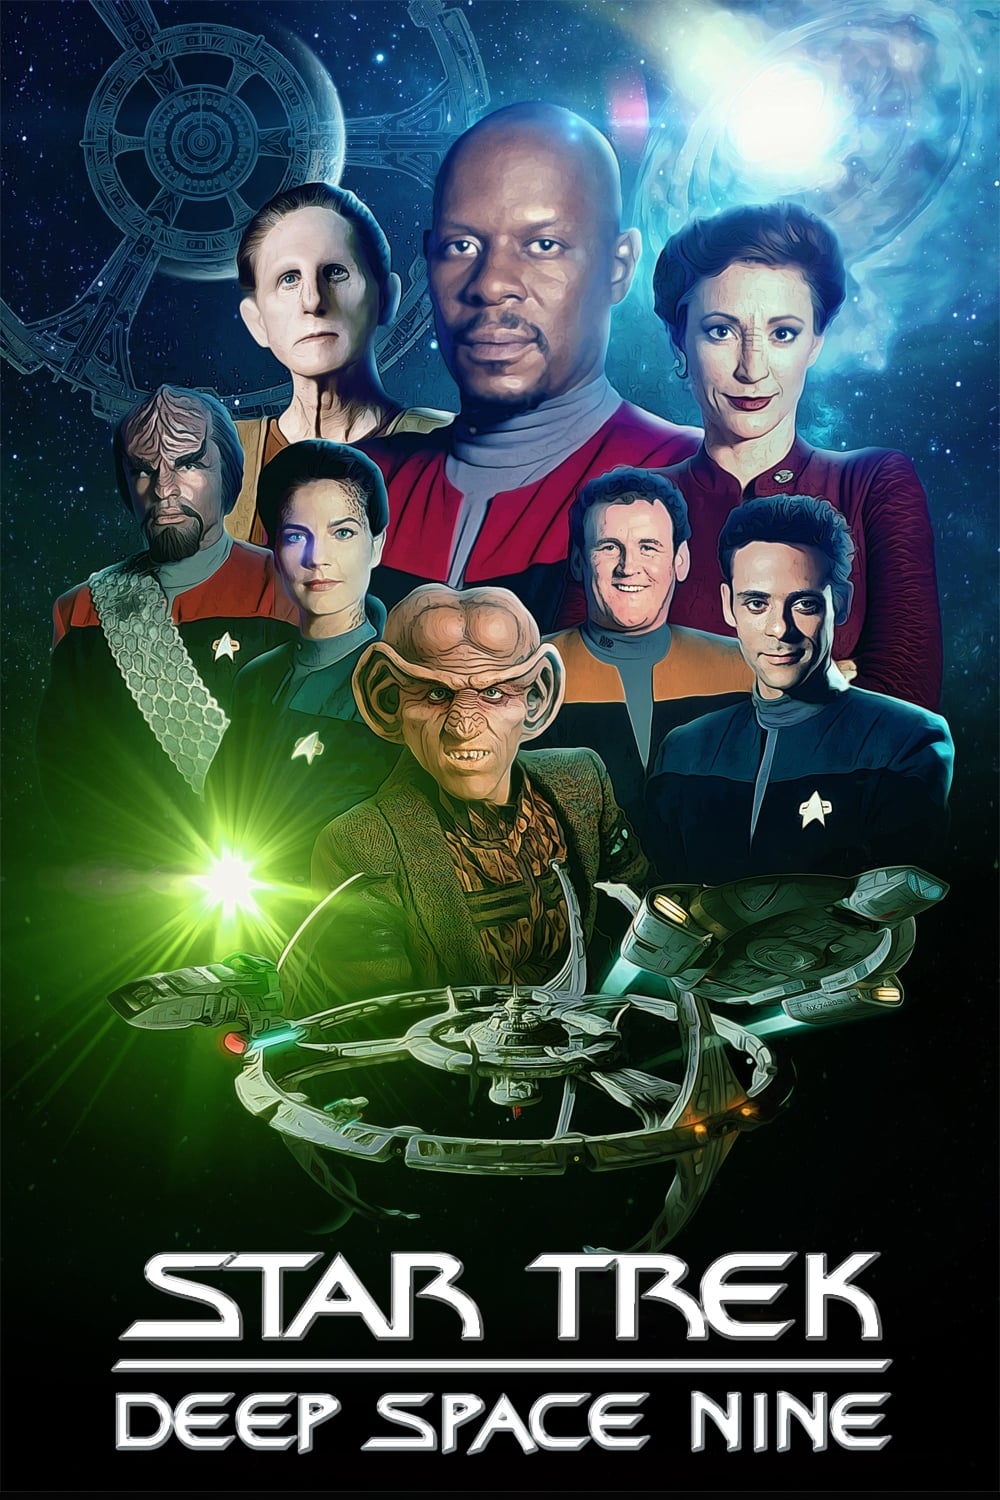 Star Trek: Deep Space Nine TV Shows About Prophecy